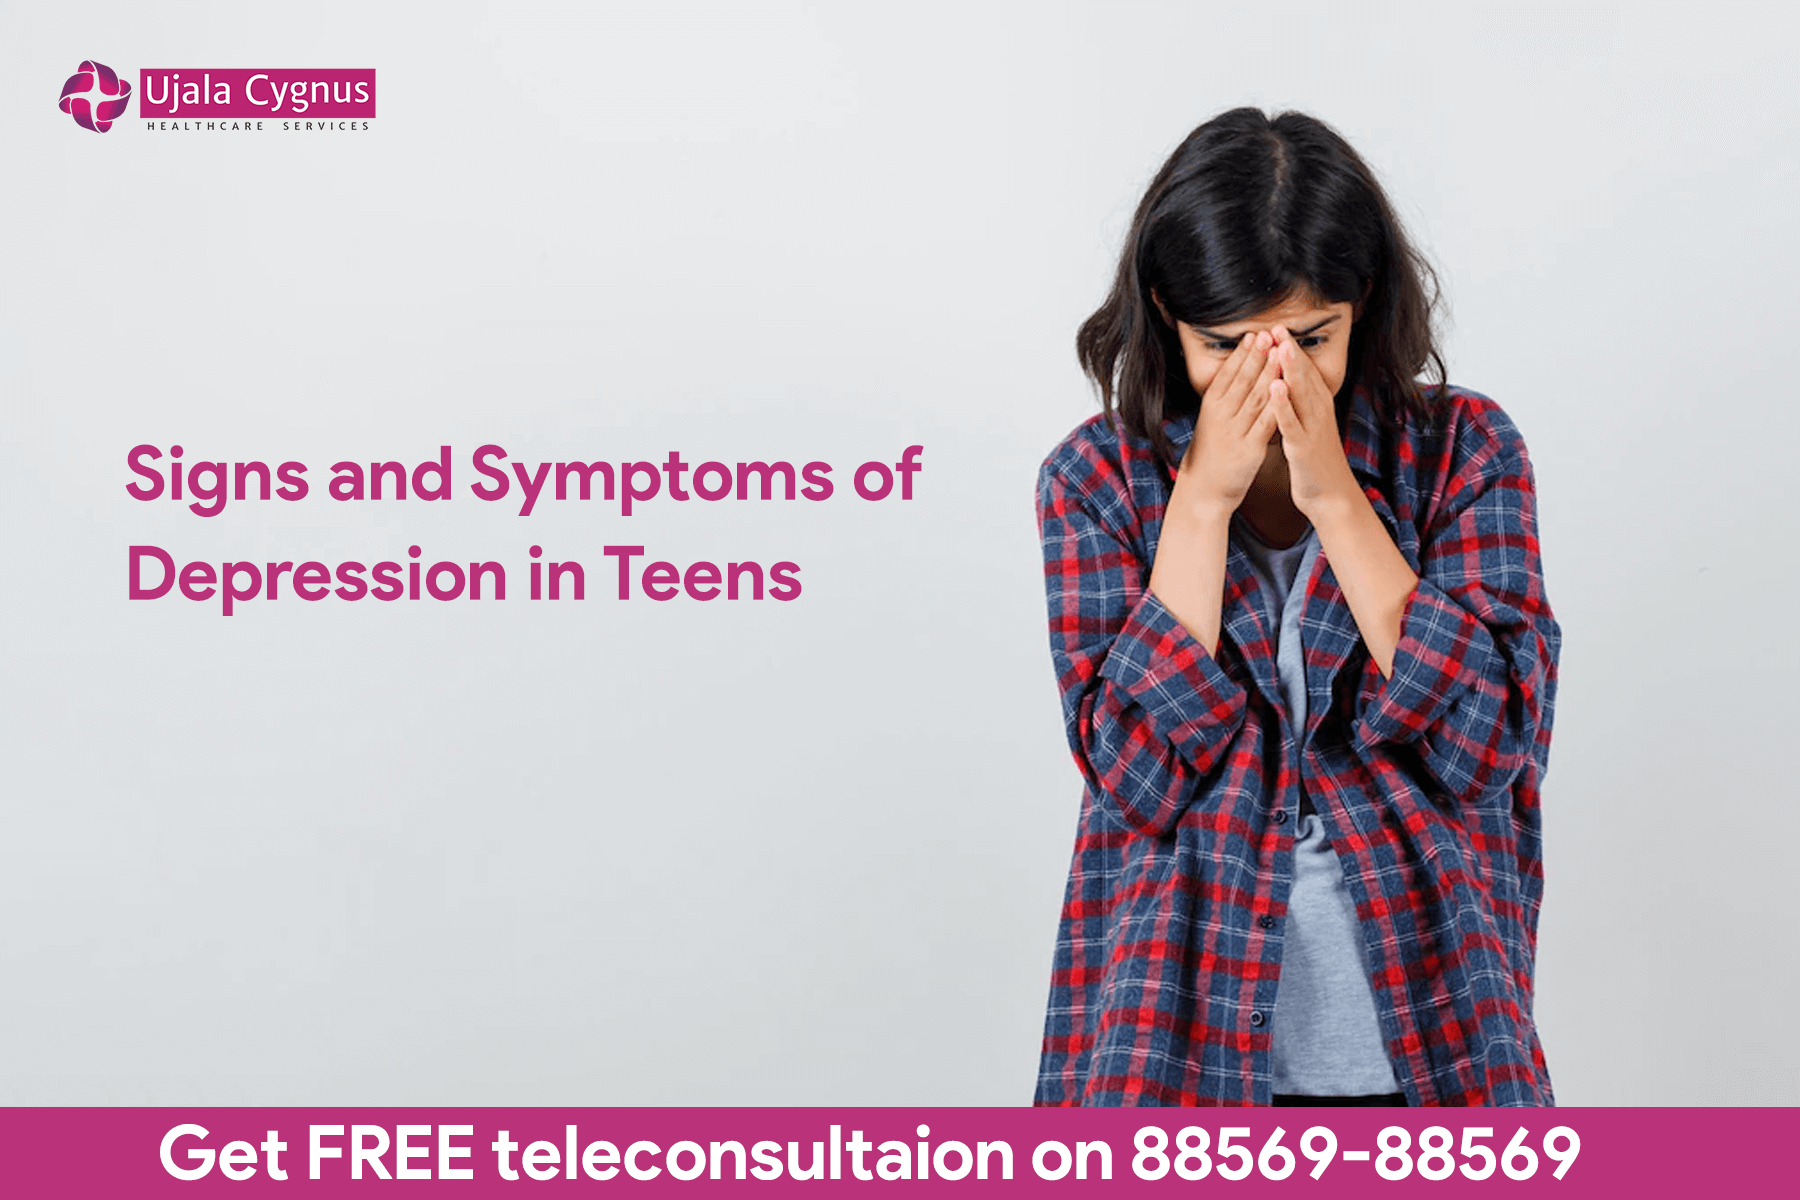 Signs and Symptoms of Depression in Teens